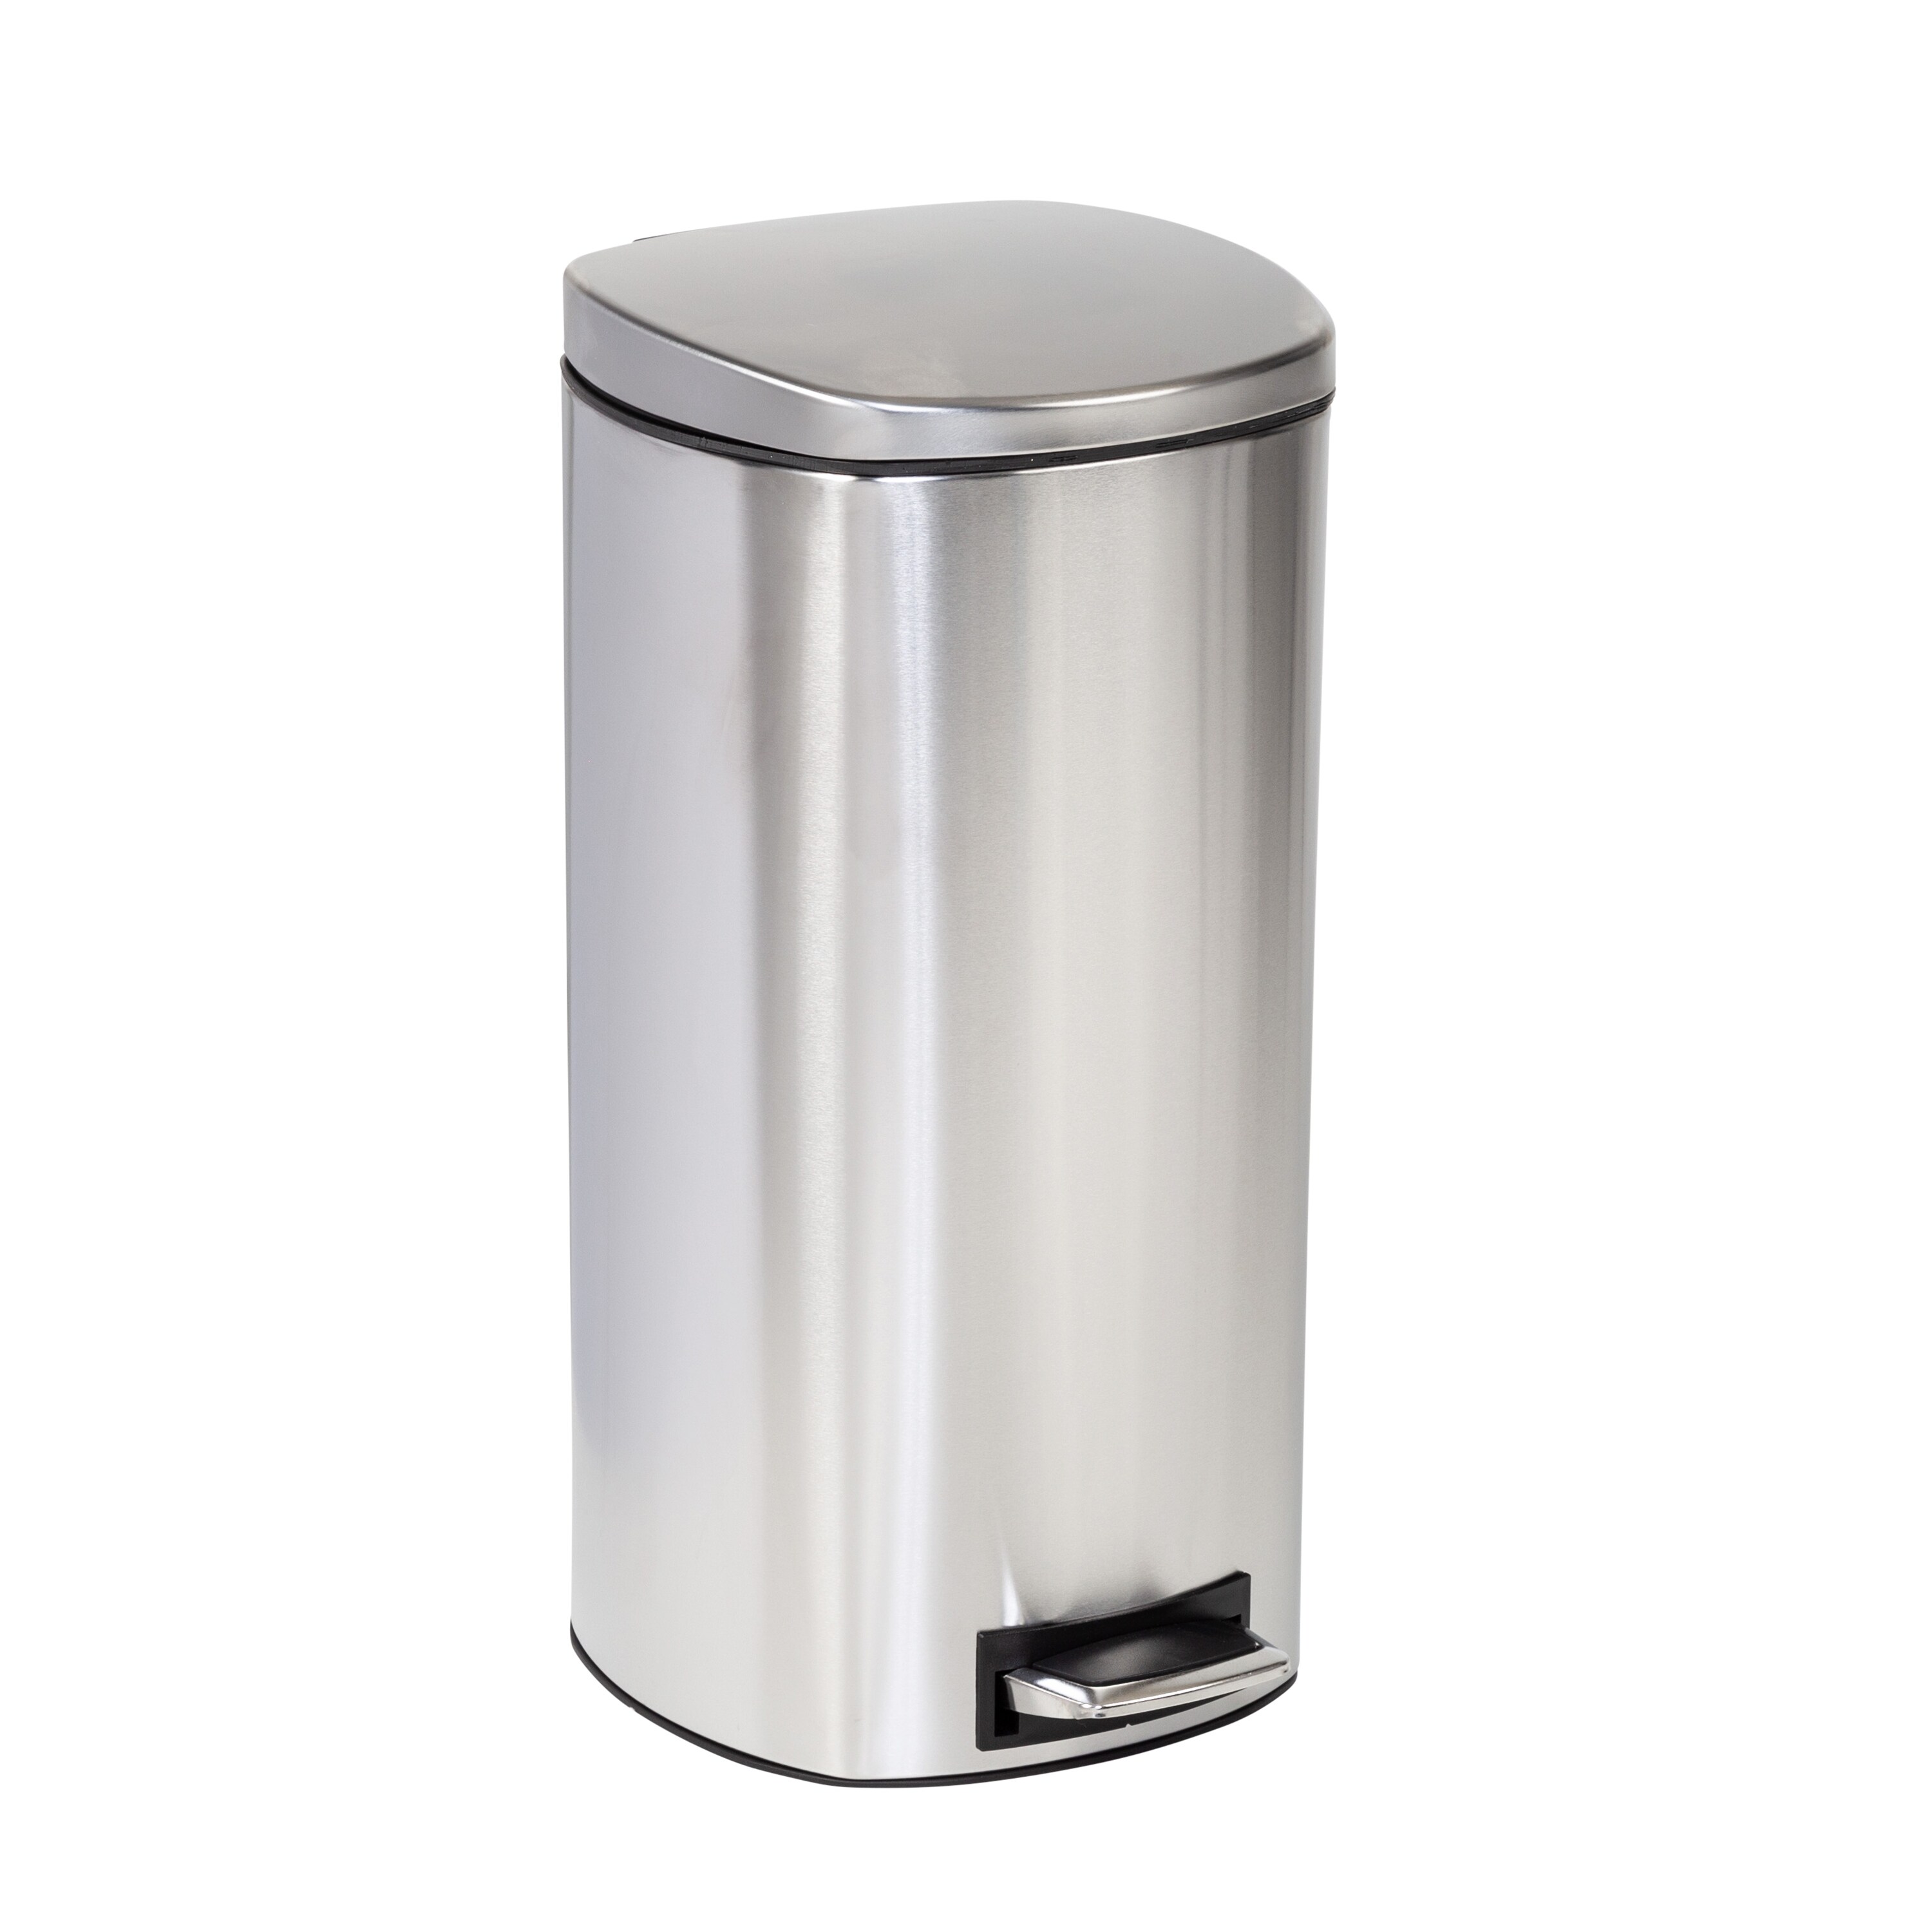 Titan 30L Trash Compactor - Stainless-steel